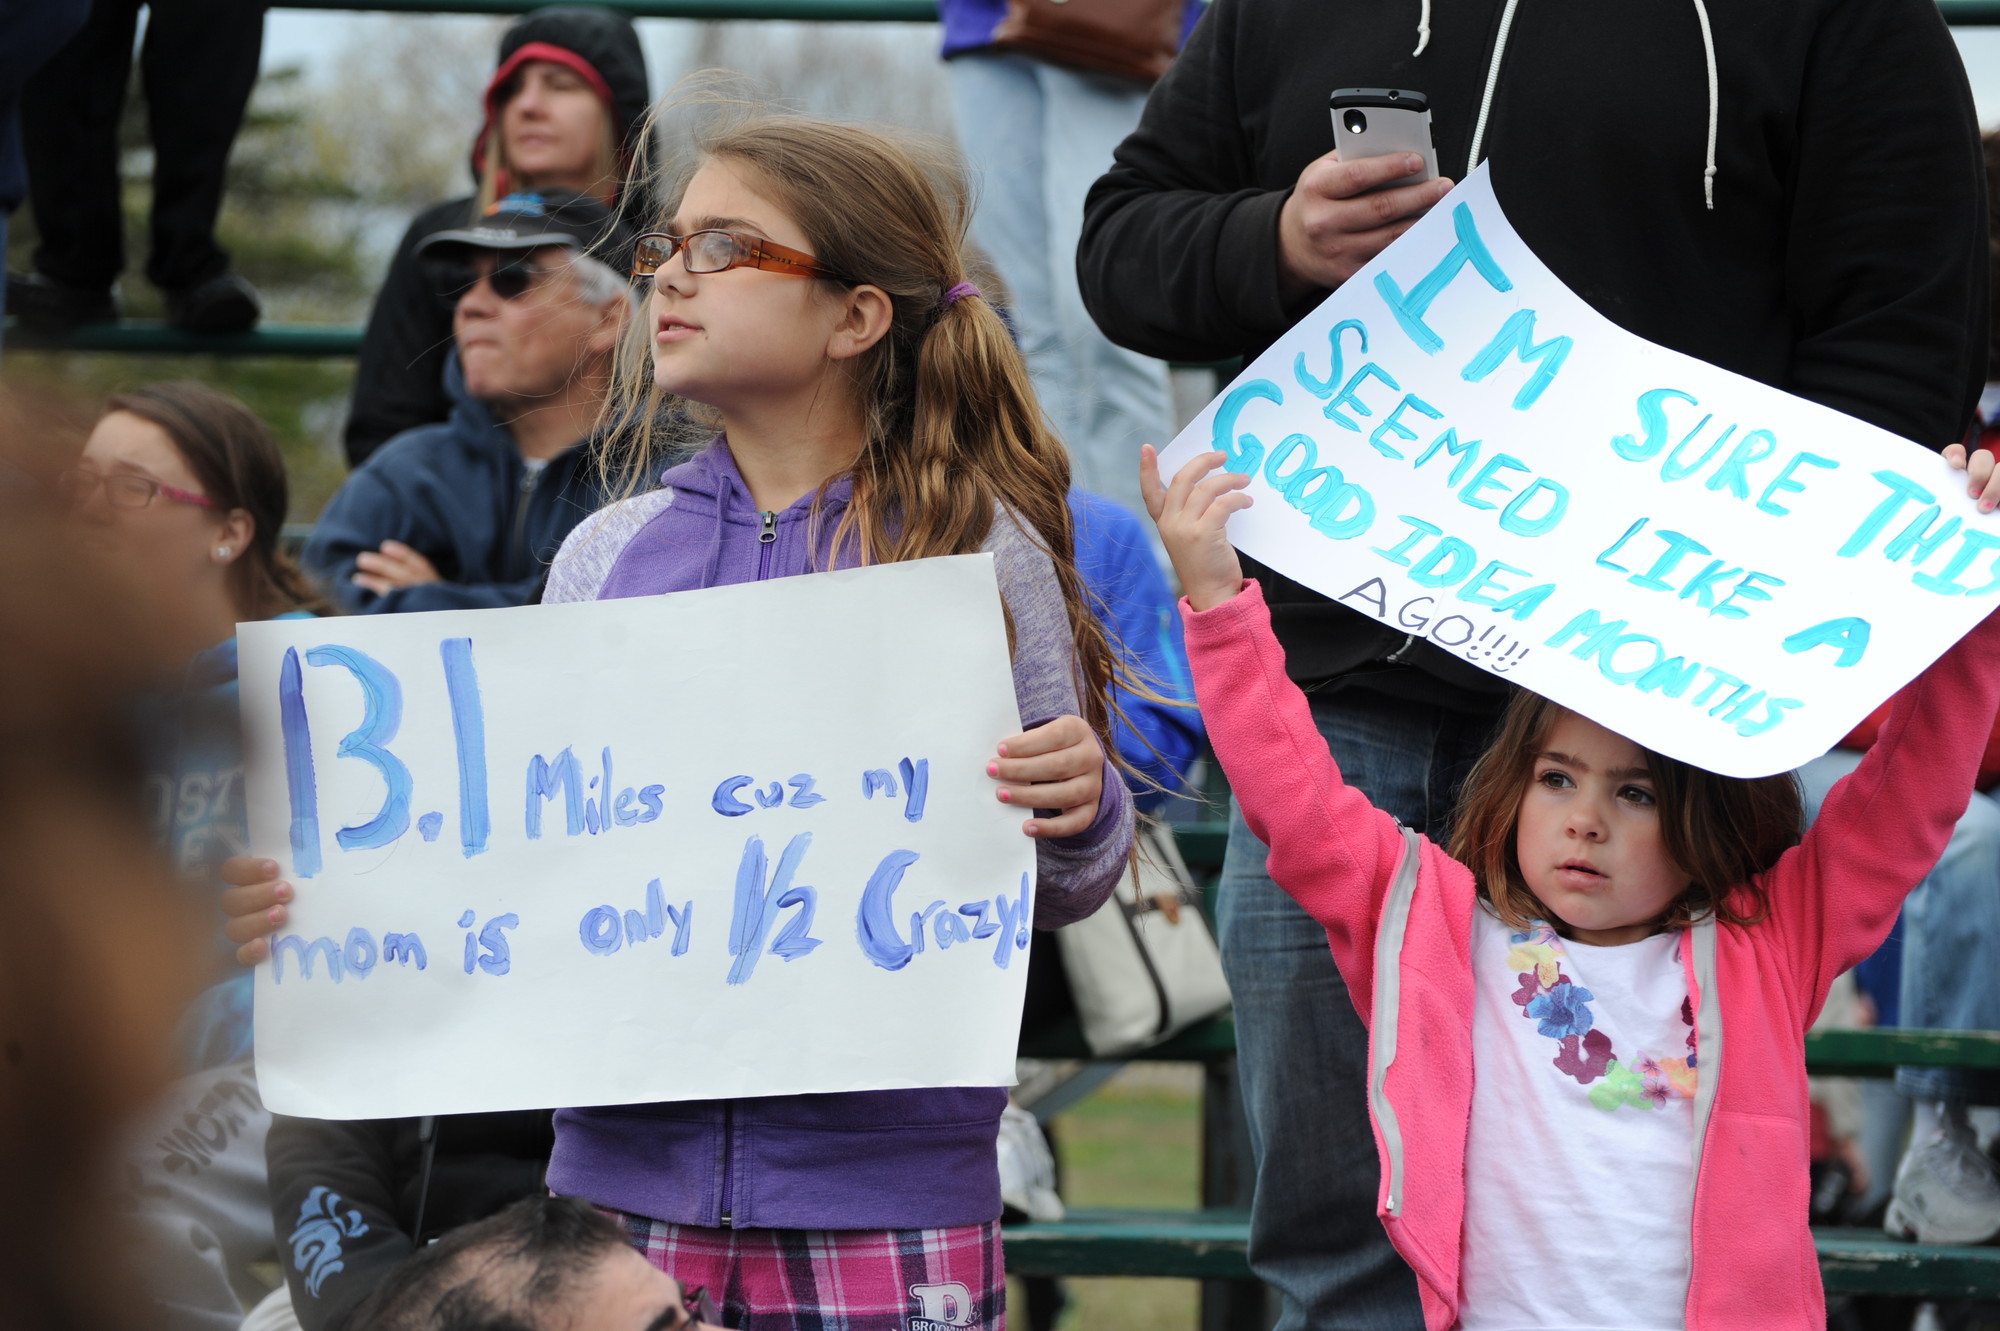 Julia Monte, 9, and sister Carly, 5, held signs of encouragement ... sort of.